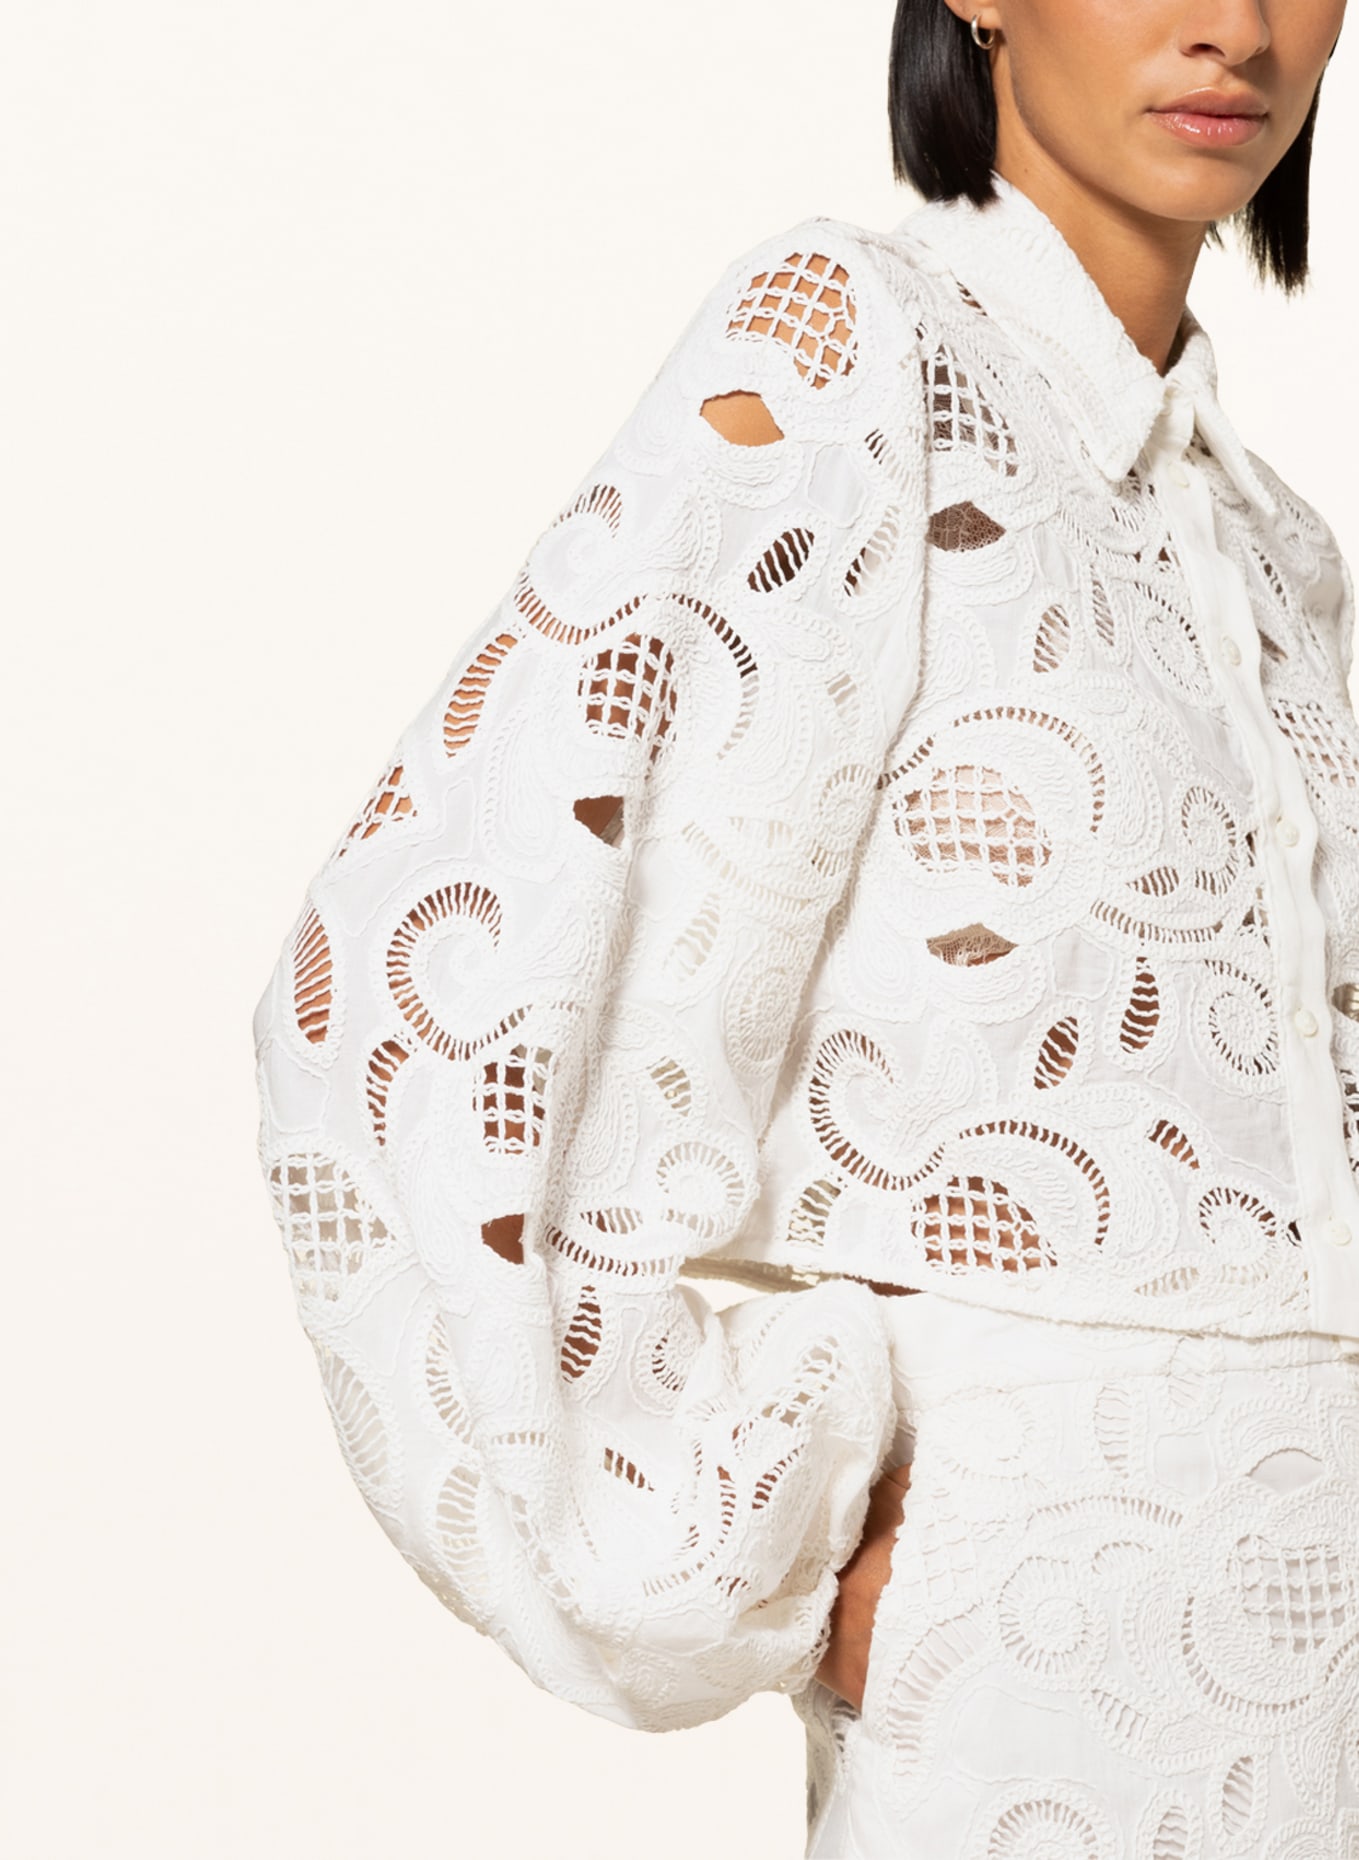 DOROTHEE SCHUMACHER Cropped shirt blouse in crochet lace, Color: WHITE (Image 4)